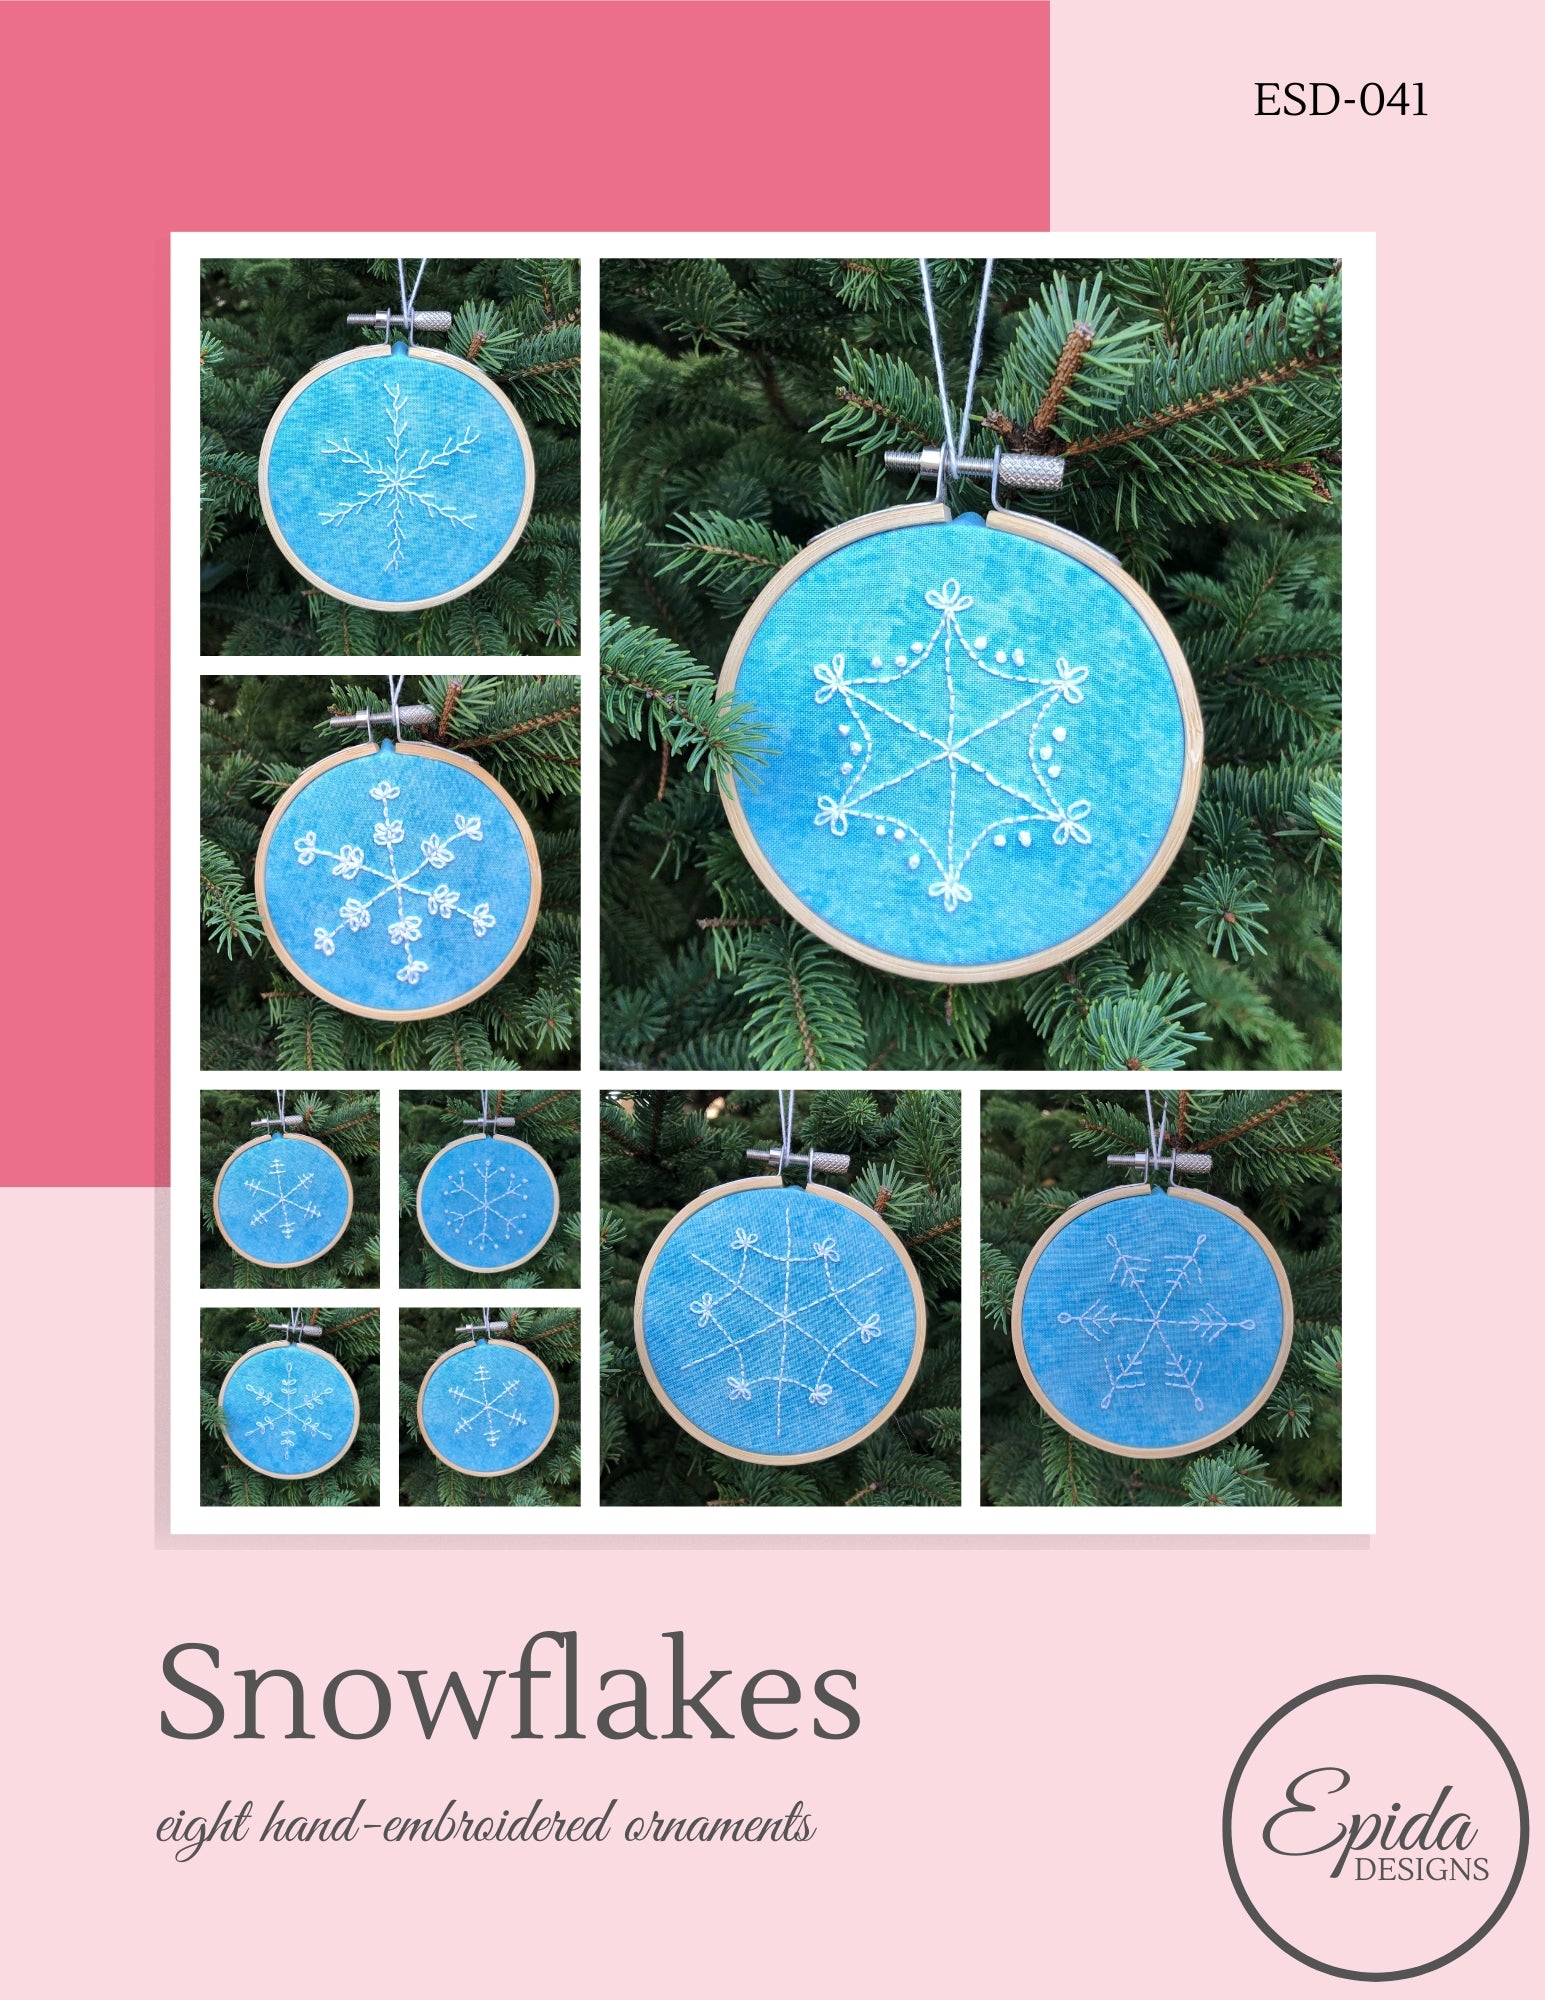 embroidered snowflake pattern cover.